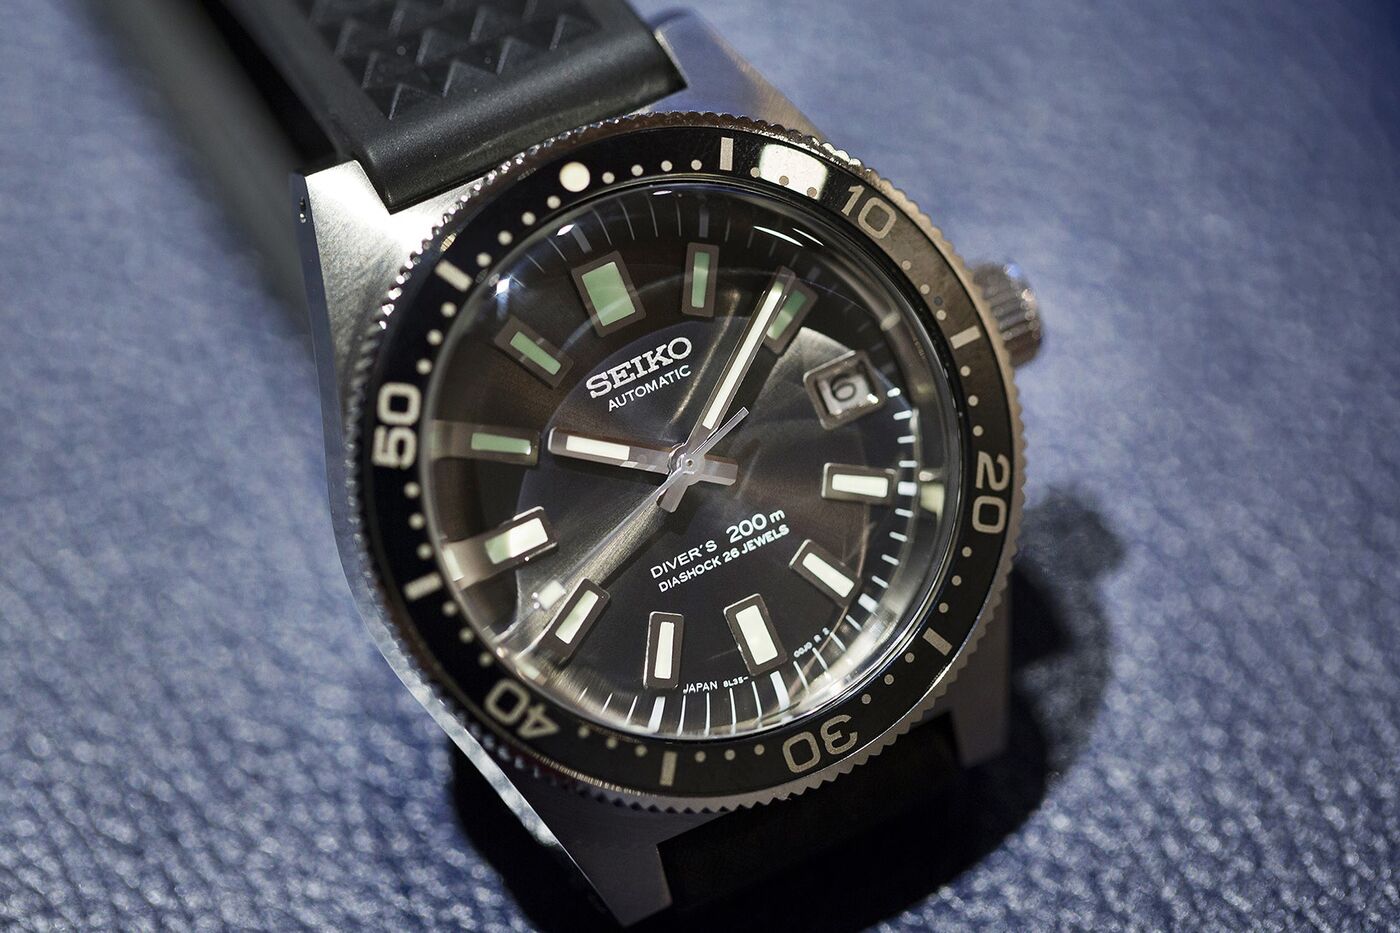 C-segment Wrist Watches: The Edge : The 10 Best Dive Watches